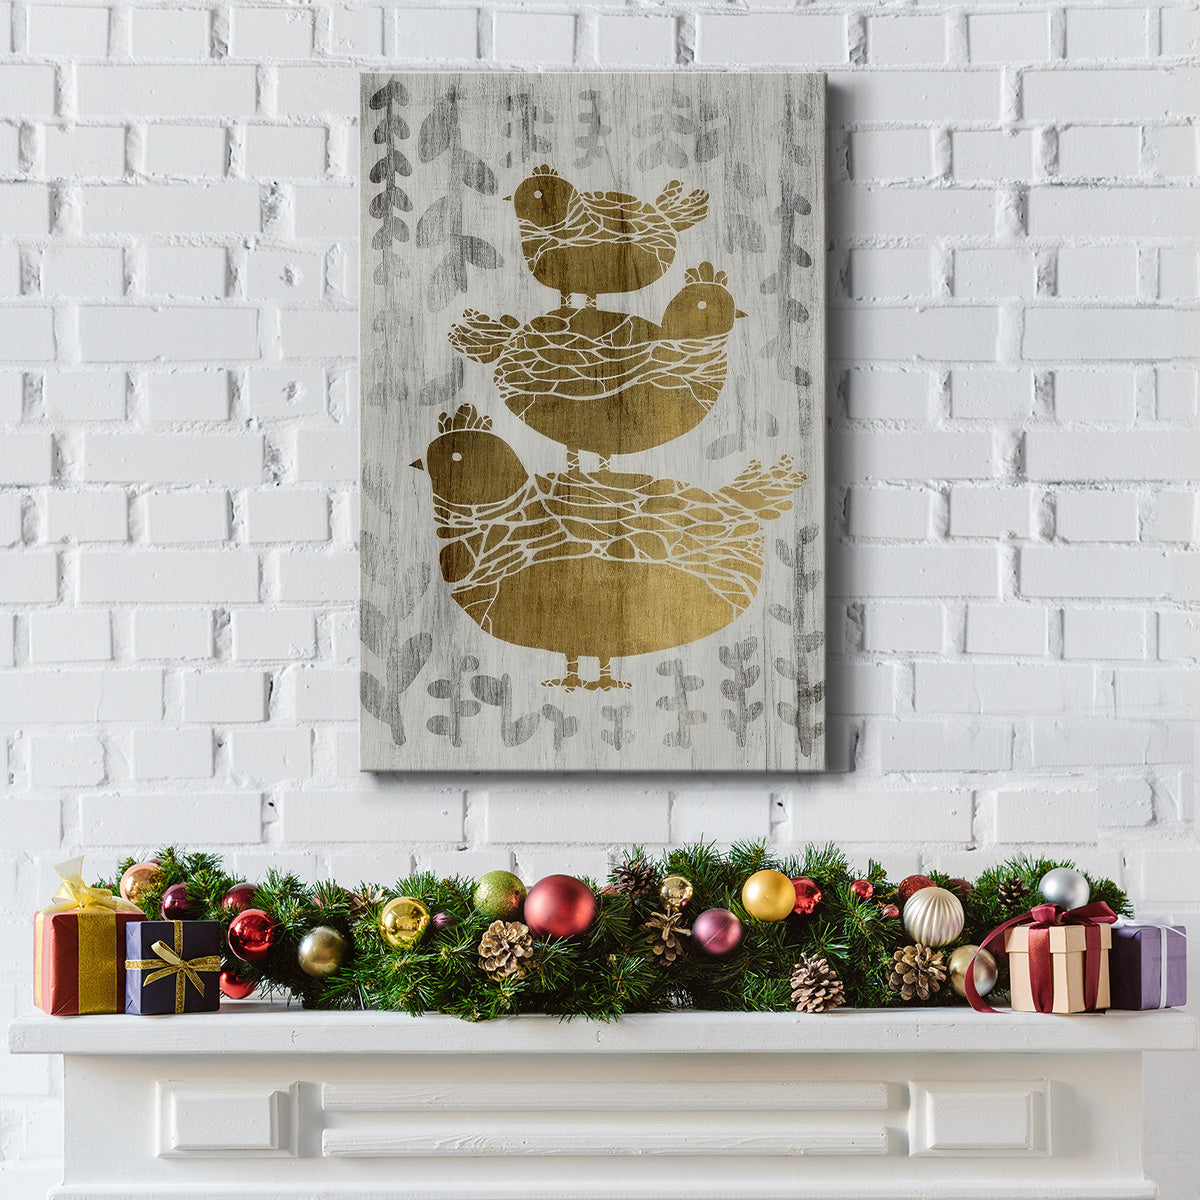 Three French Hens  - Gold Leaf Holiday - Gallery Wrapped Canvas